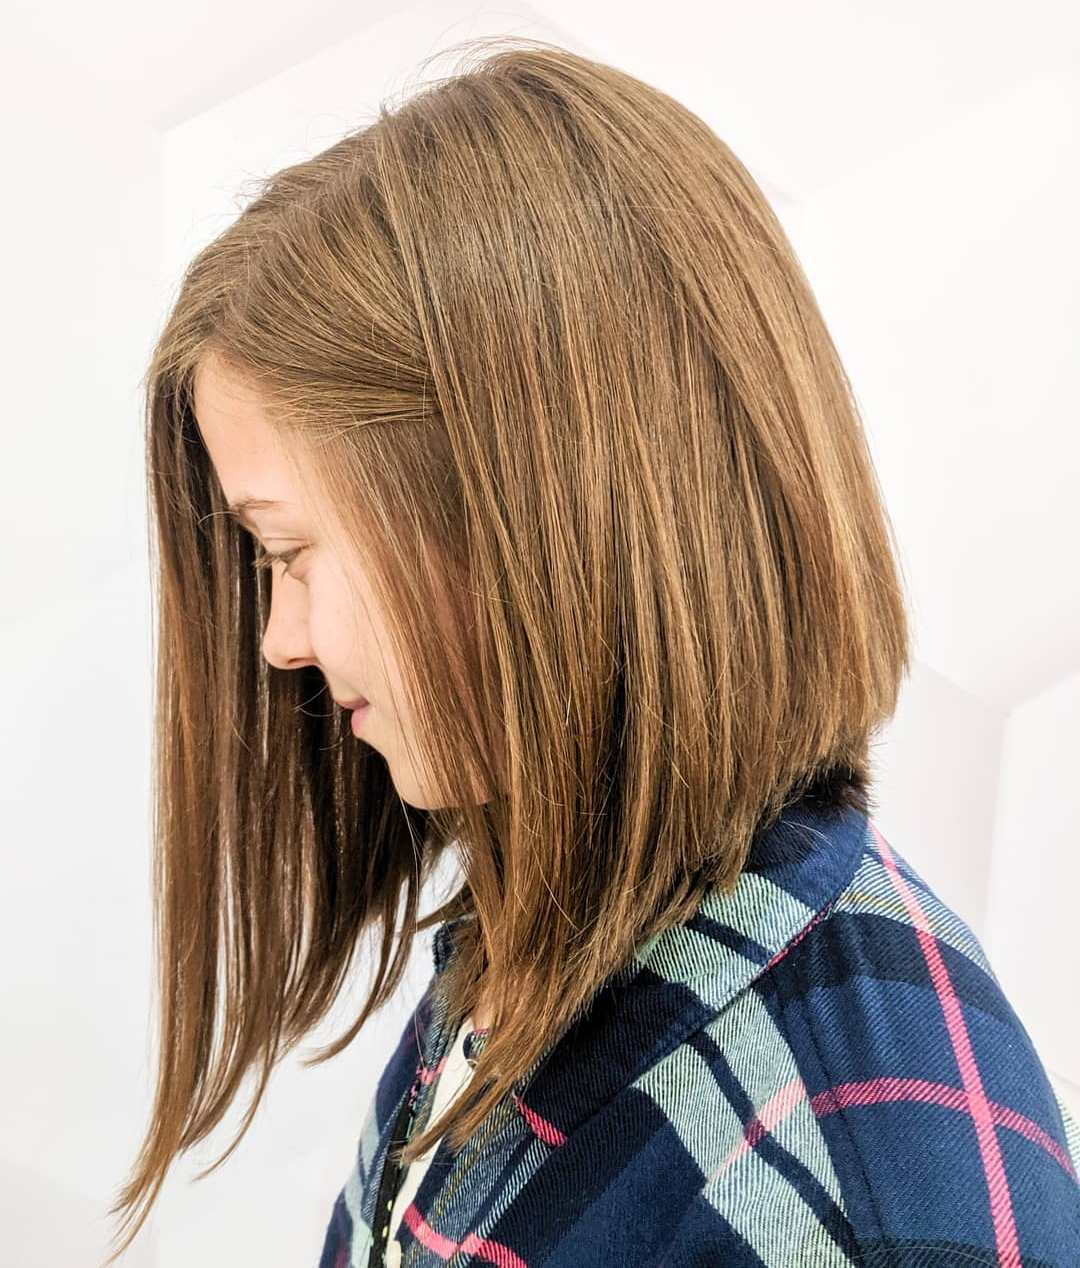 Medium Angled Cut For Young Girls